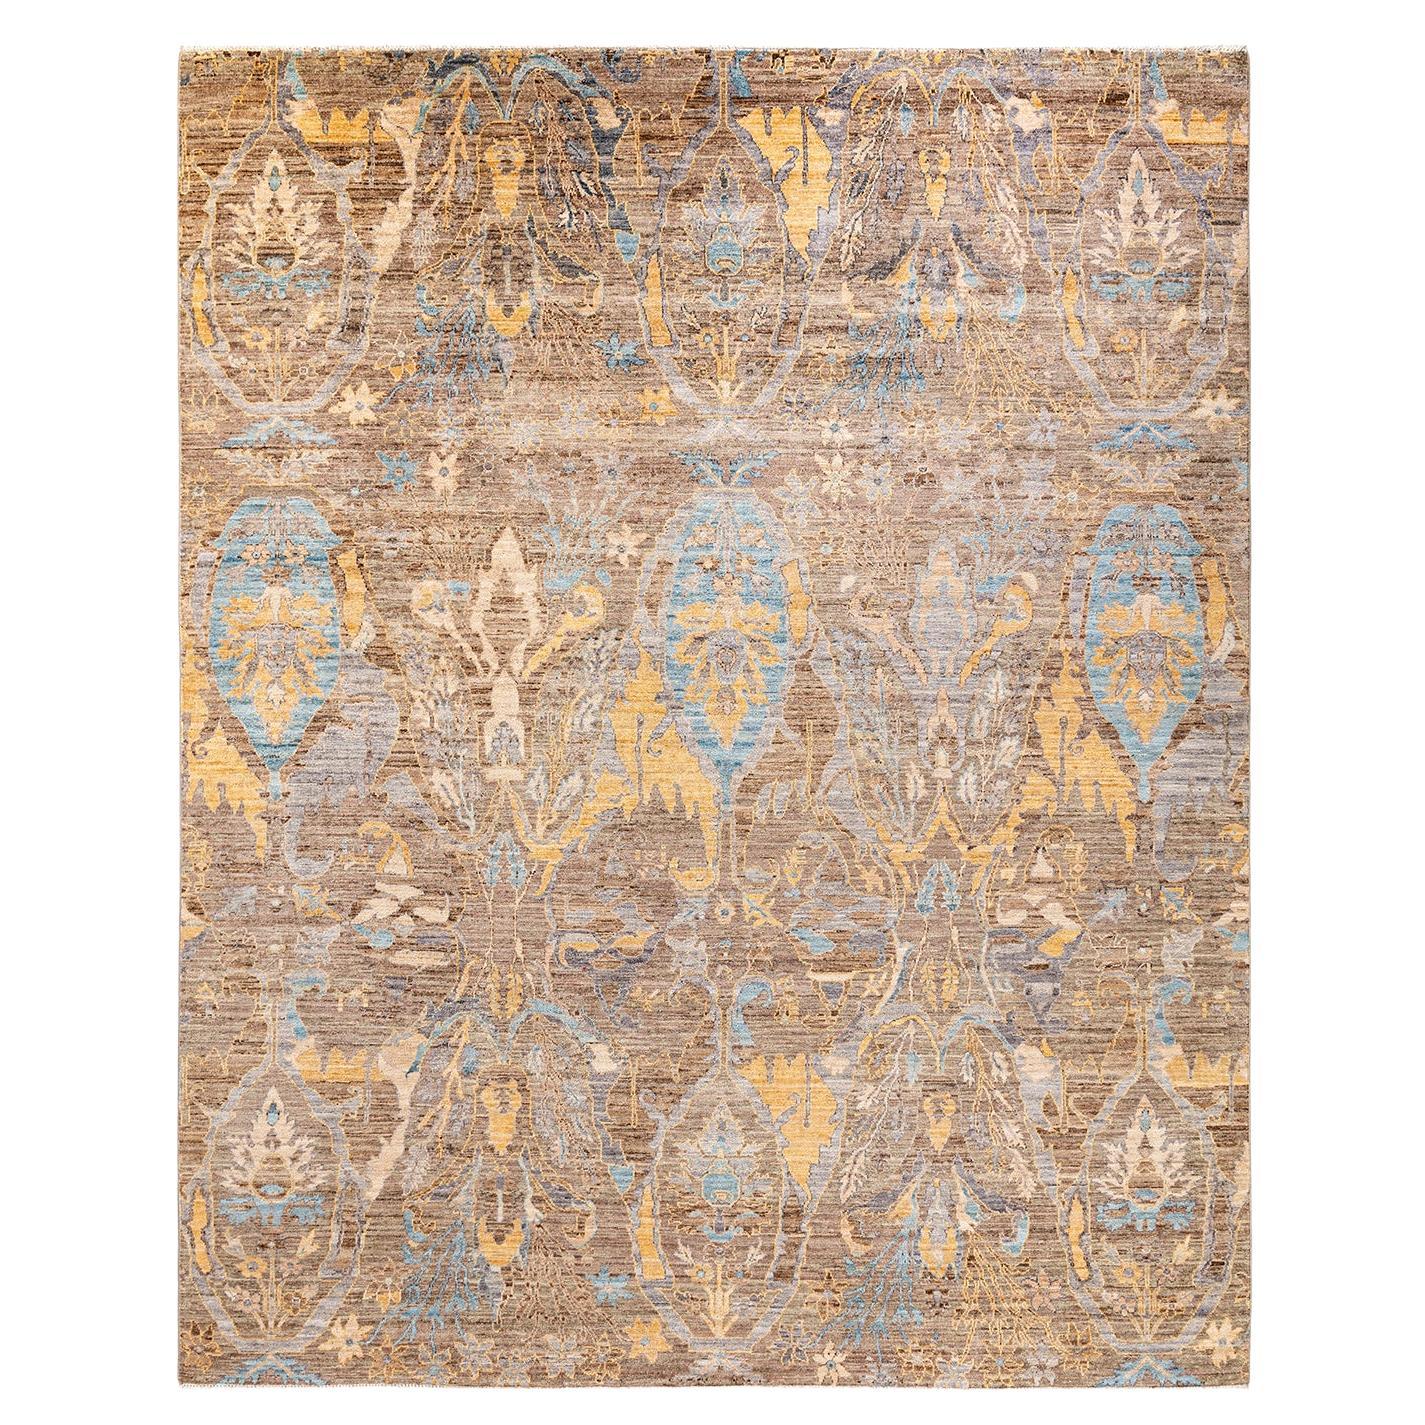 Traditional Tribal Hand Knotted Wool Brown Area Rug